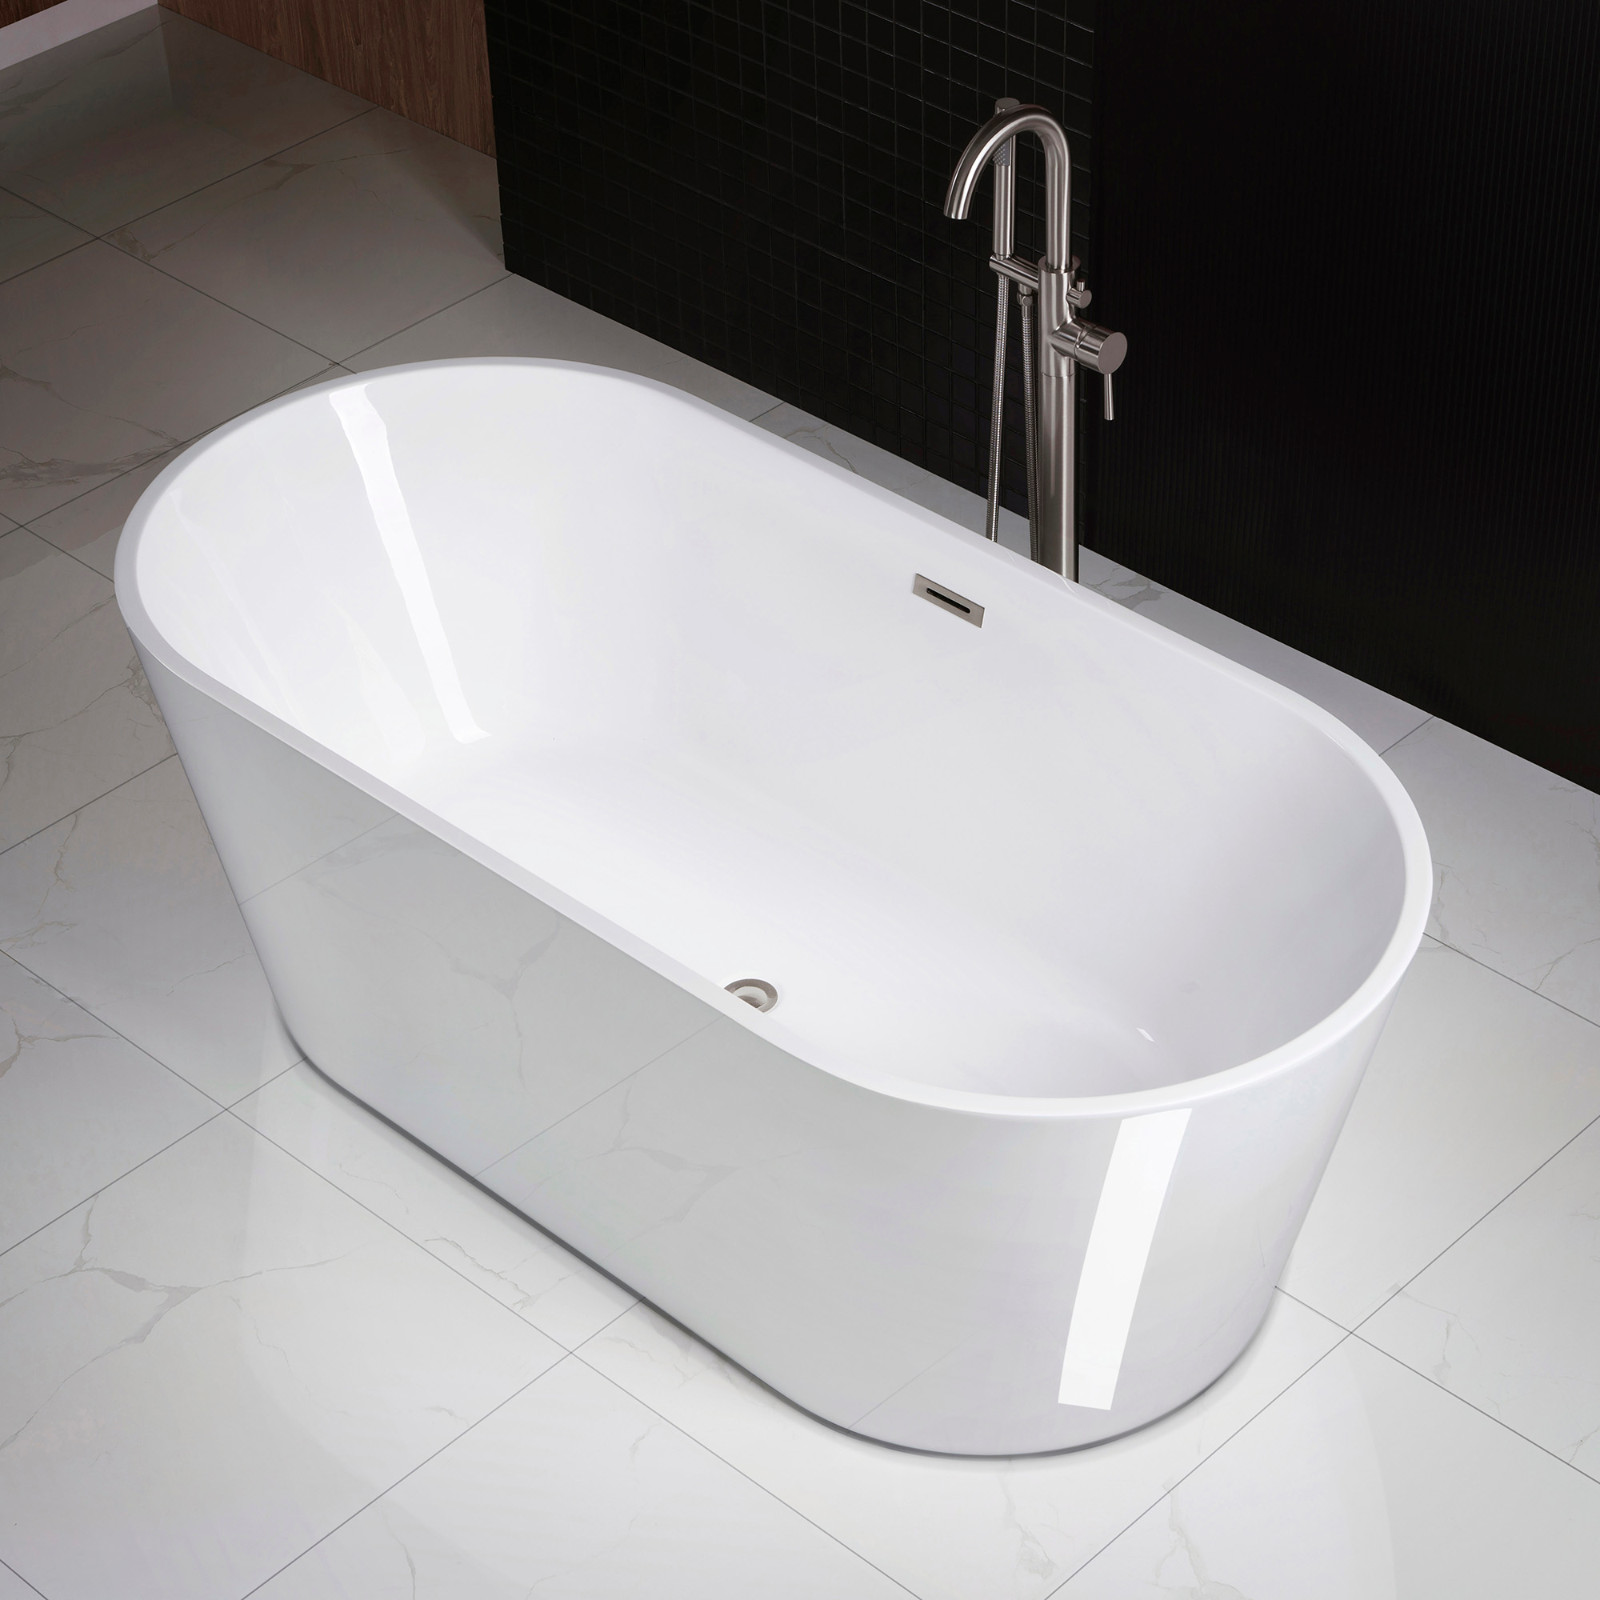 ALTA 67 INCH ACRYLIC DOUBLE ENDED FREESTANDING TUB